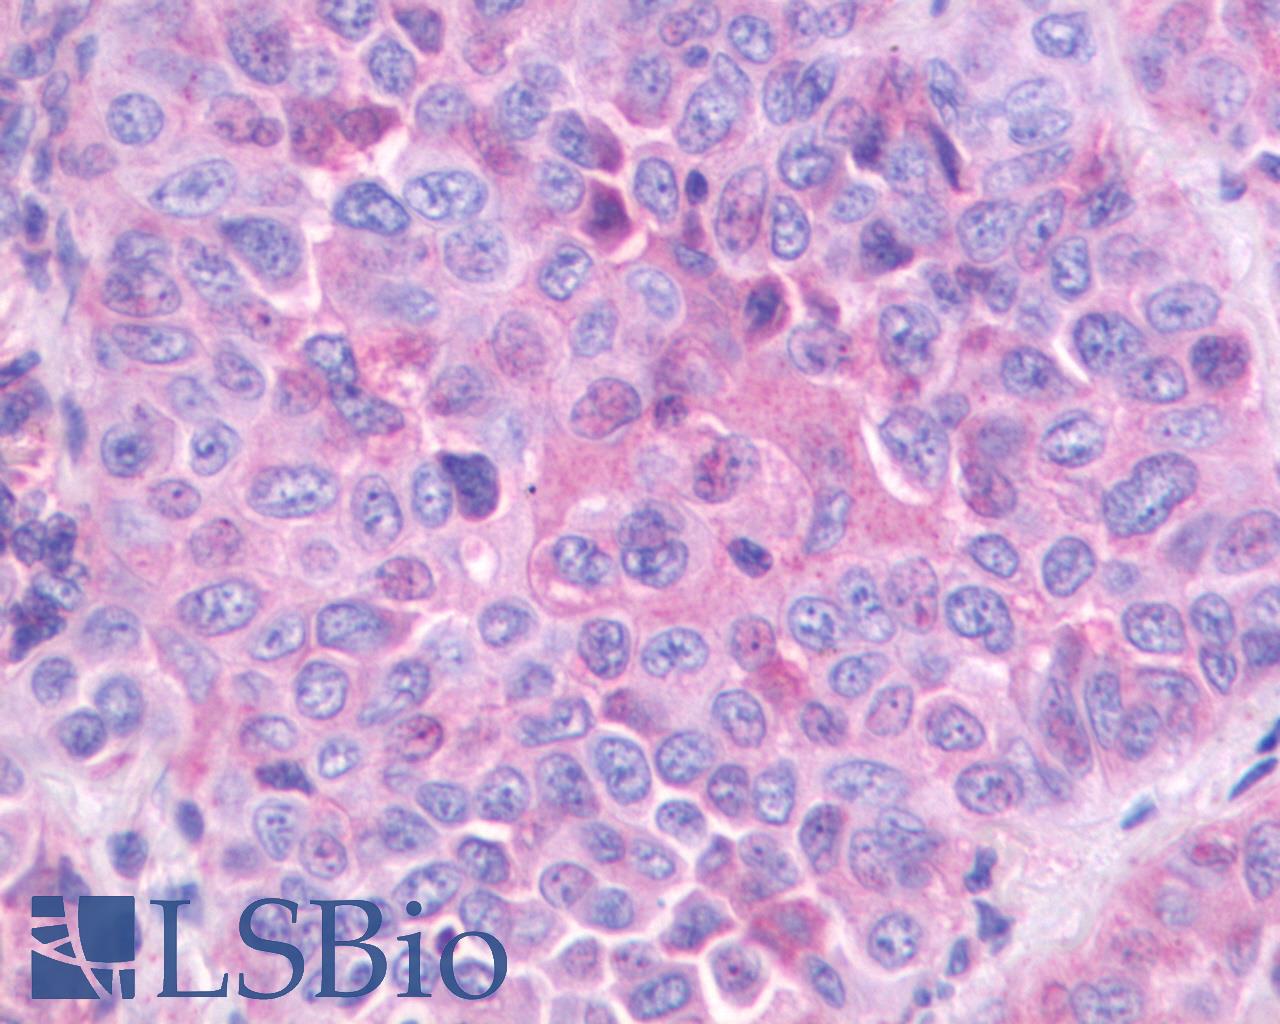 GRPR Antibody - Anti-GRPR antibody IHC of human Lung, Non-Small Cell Carcinoma. Immunohistochemistry of formalin-fixed, paraffin-embedded tissue after heat-induced antigen retrieval.